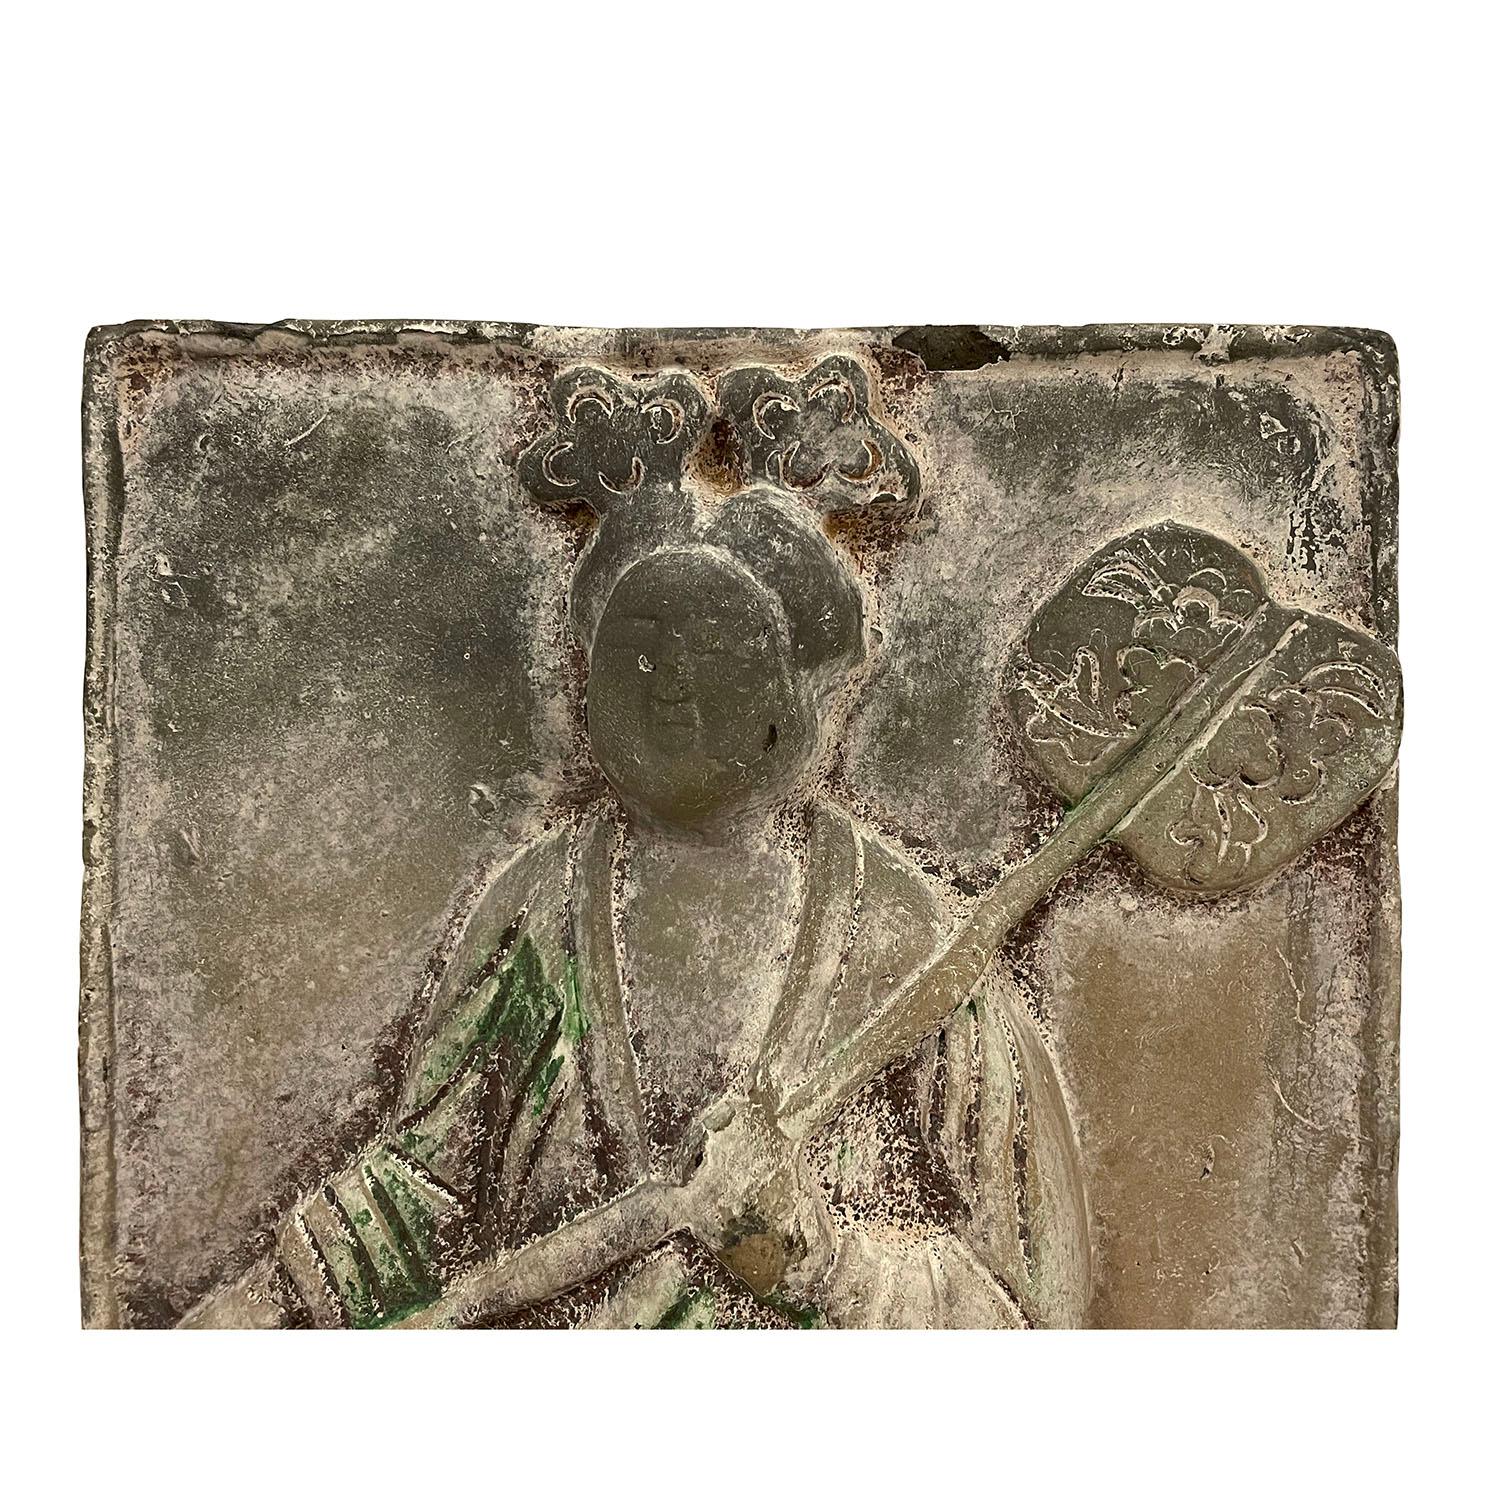 Look at this magnificent Chinese Antique Clay Beauty Mural Brick. It was hand made reproduction from Tang Dynasty. This Mural Brick has very detailed handcrafted beauty arts on it with an honor fan held in her hands. You can see from the pictures